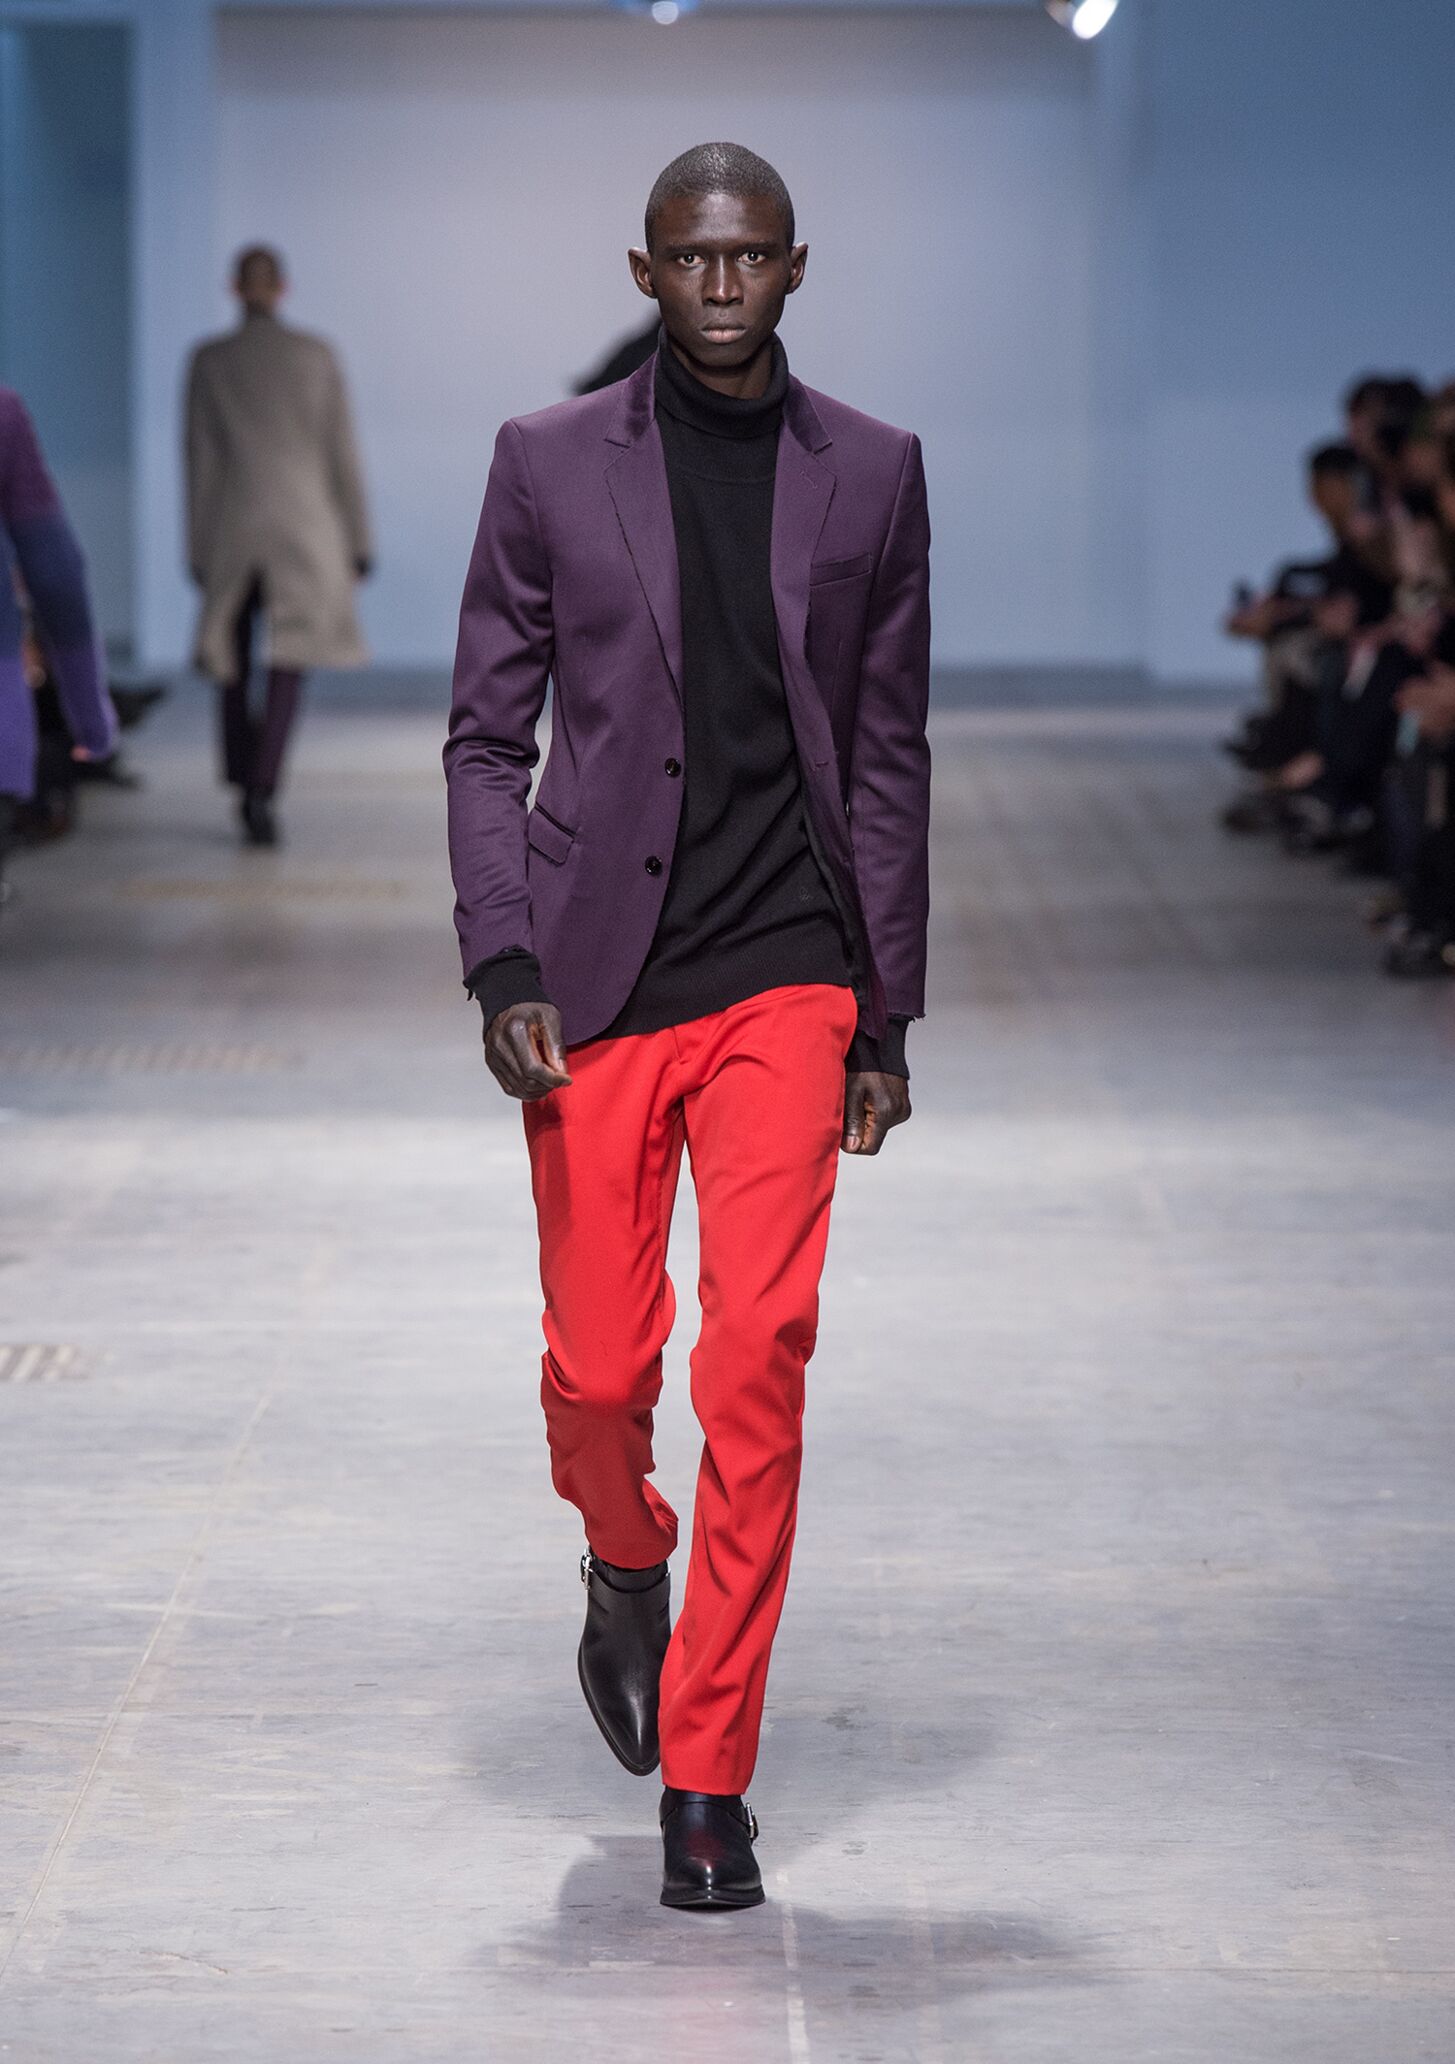 Winter 2014 Man Trends Color Costume National